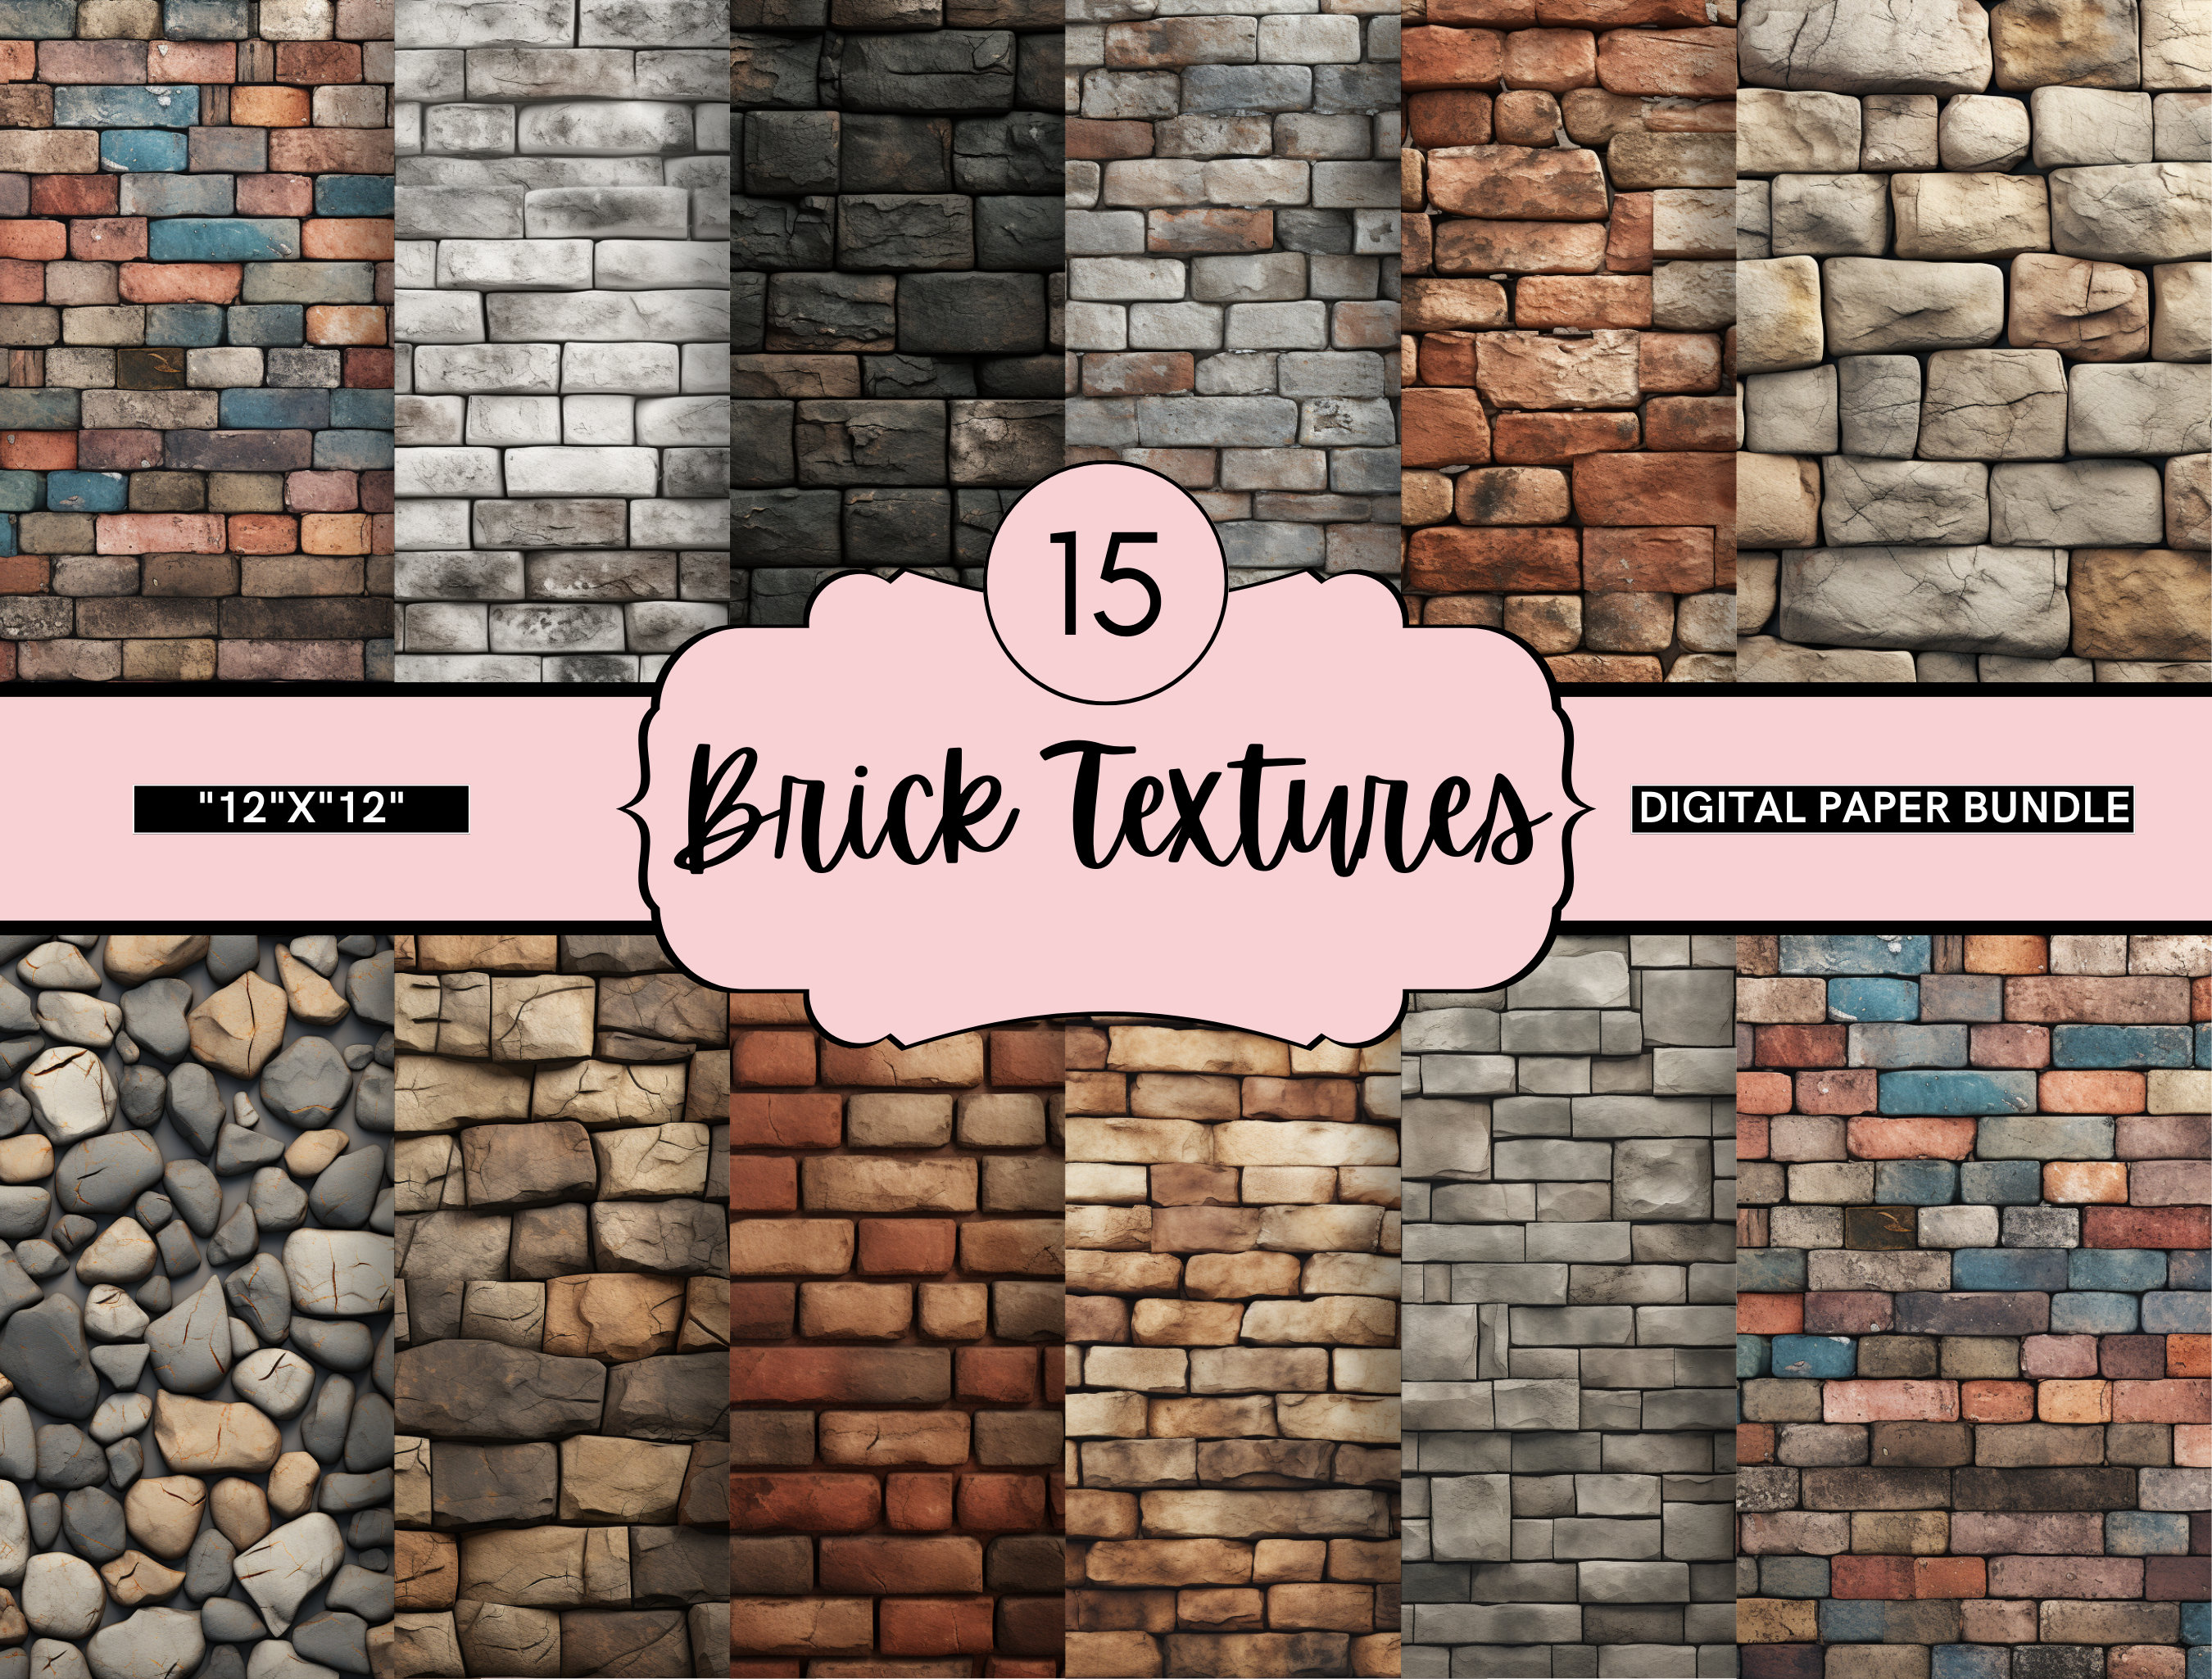 Brick Wall Texture Roller High Quality Texture for Modeling Clay 7